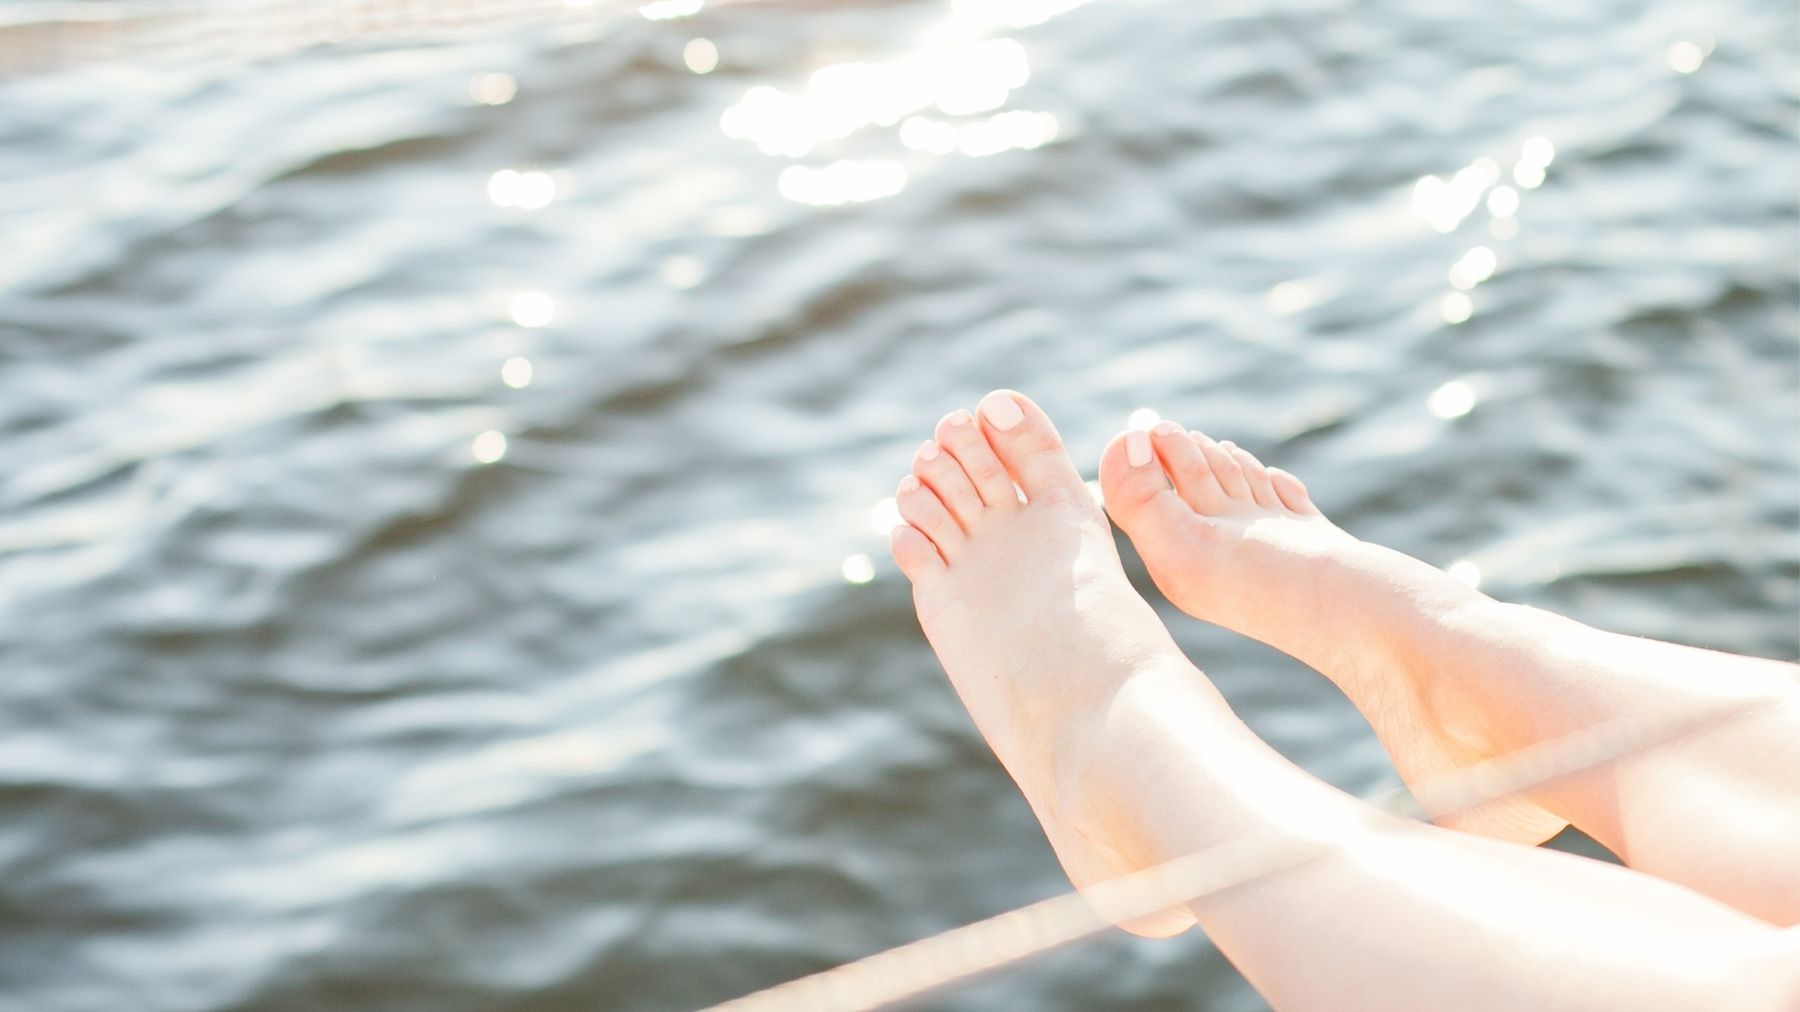 HOW TO REMOVE DEAD SKIN CELLS FROM YOUR FEET IN MINUTES